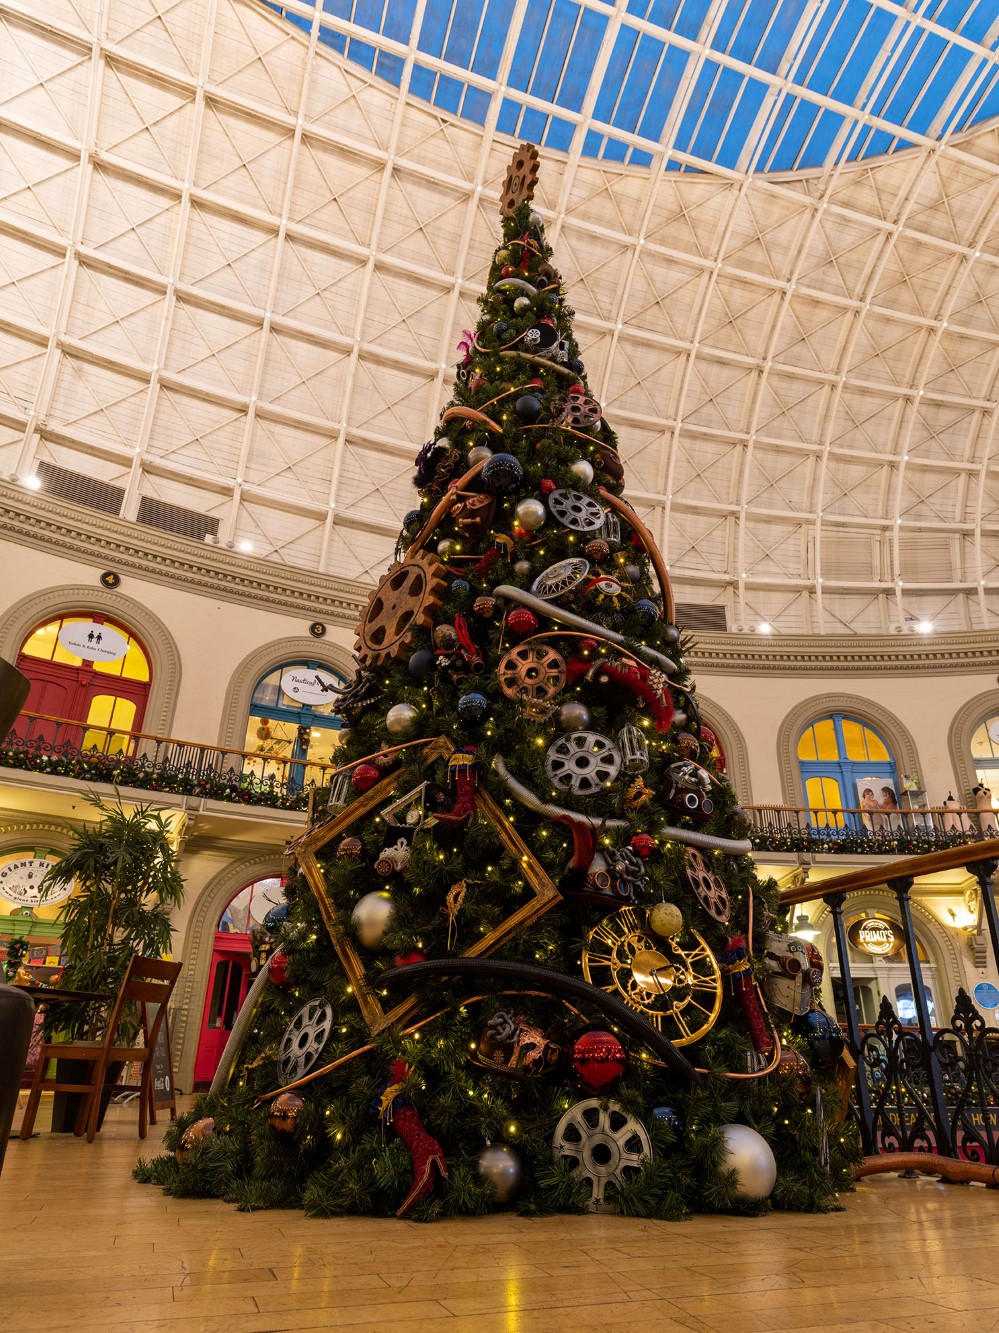 Large-scale Christmas Tree designed by Fizzco Projects at Leeds Corn Exchange Shopping Centre for the Christmas season.